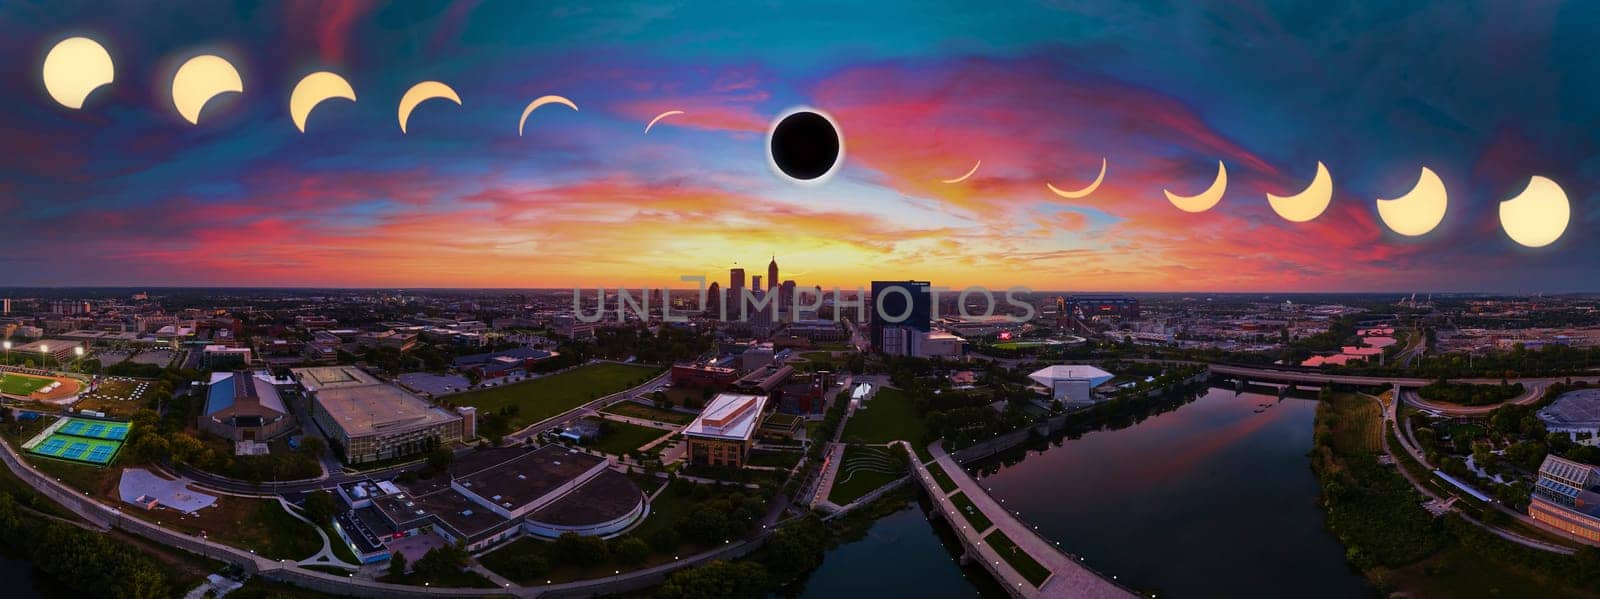 Solar Eclipse Over Indianapolis Skyline - Rare Aerial Panorama Capturing Nature's Majestic Dance with Urban Sprawl, April 2024.